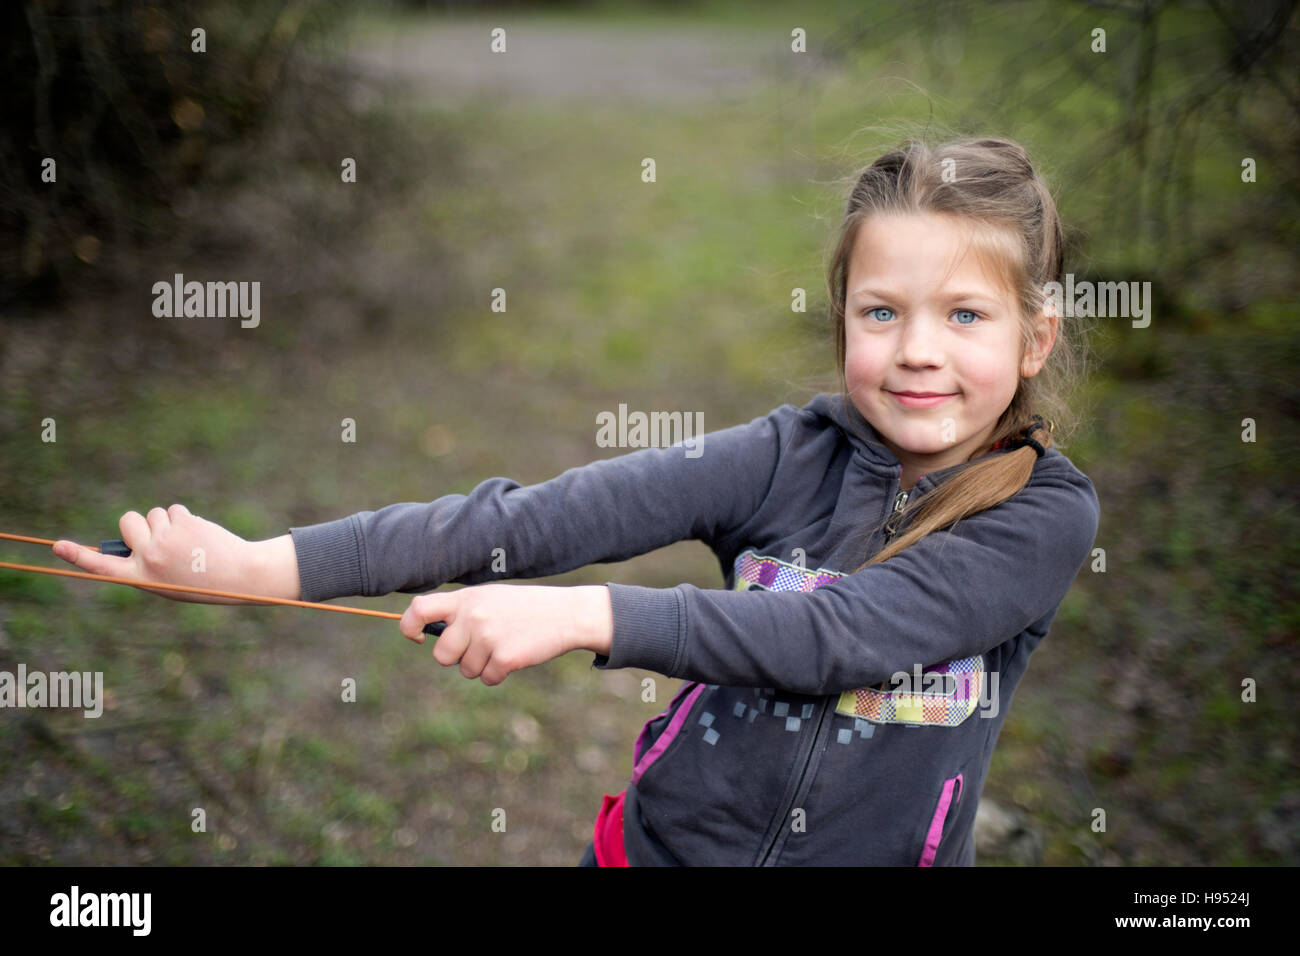 girl pulling skipping rope outdoor looking to camera Stock Photo